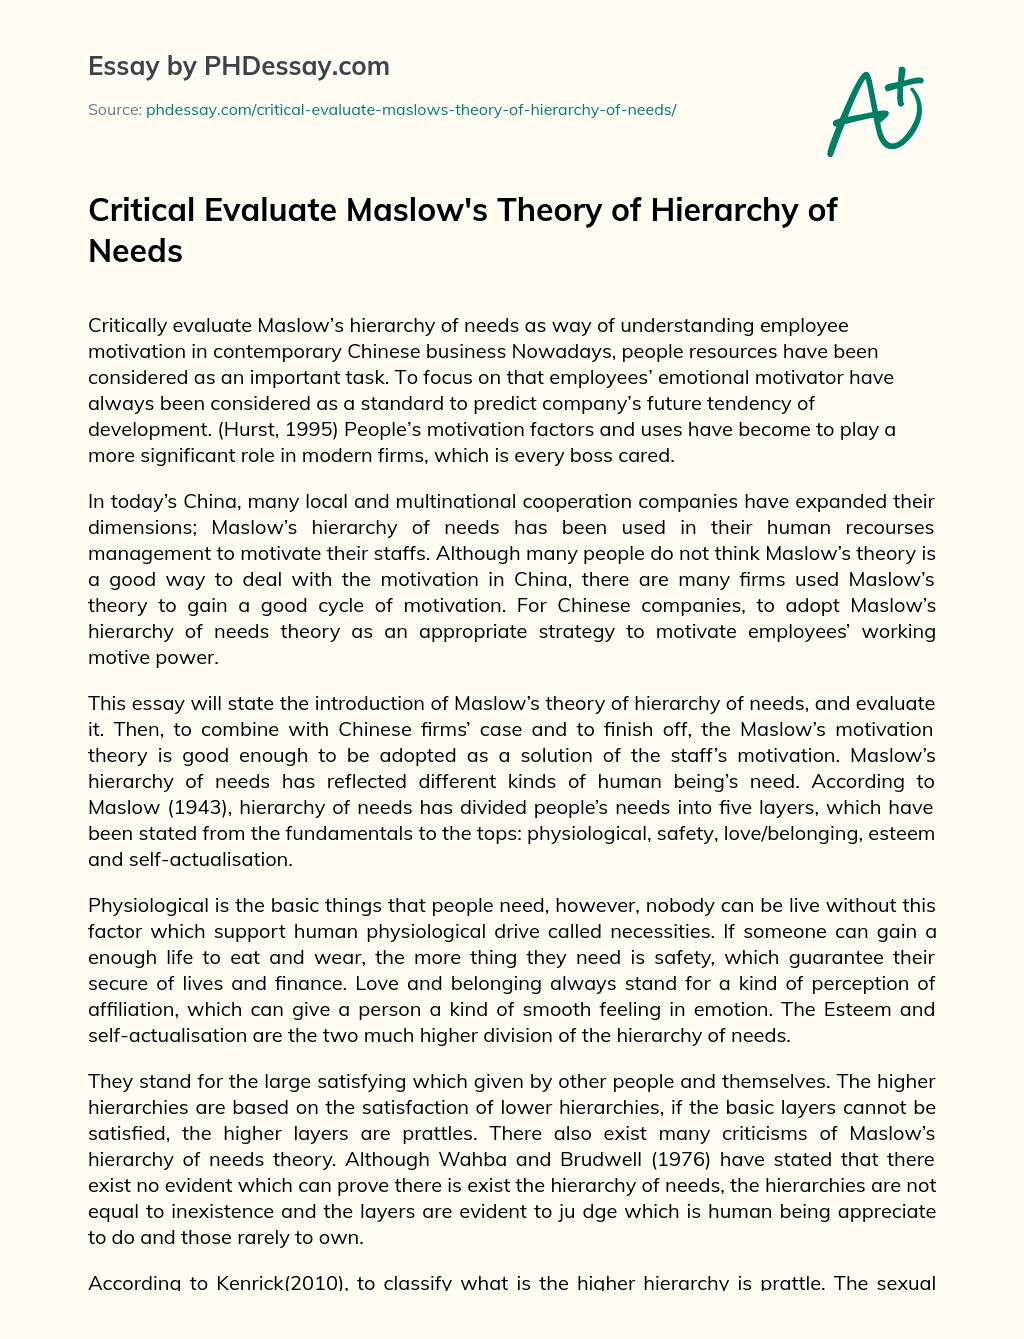 Critical Evaluate Maslow’s Theory of Hierarchy of Needs essay